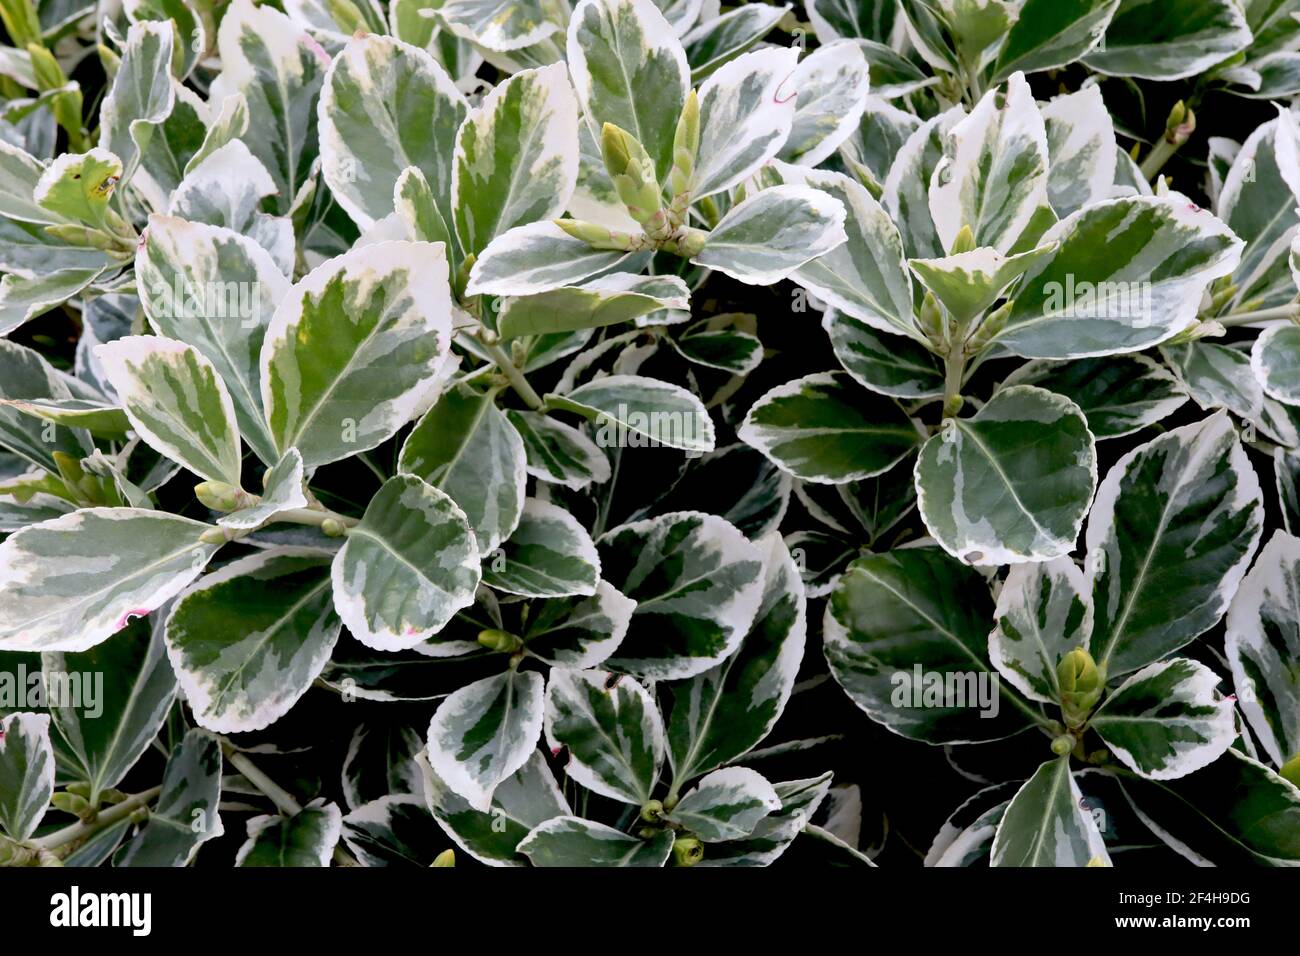 Euonymus japonicus ‘President Gauthier’ Spindle President Gauthier – grey green leaves with creamy white margins,  March, England, UK Stock Photo